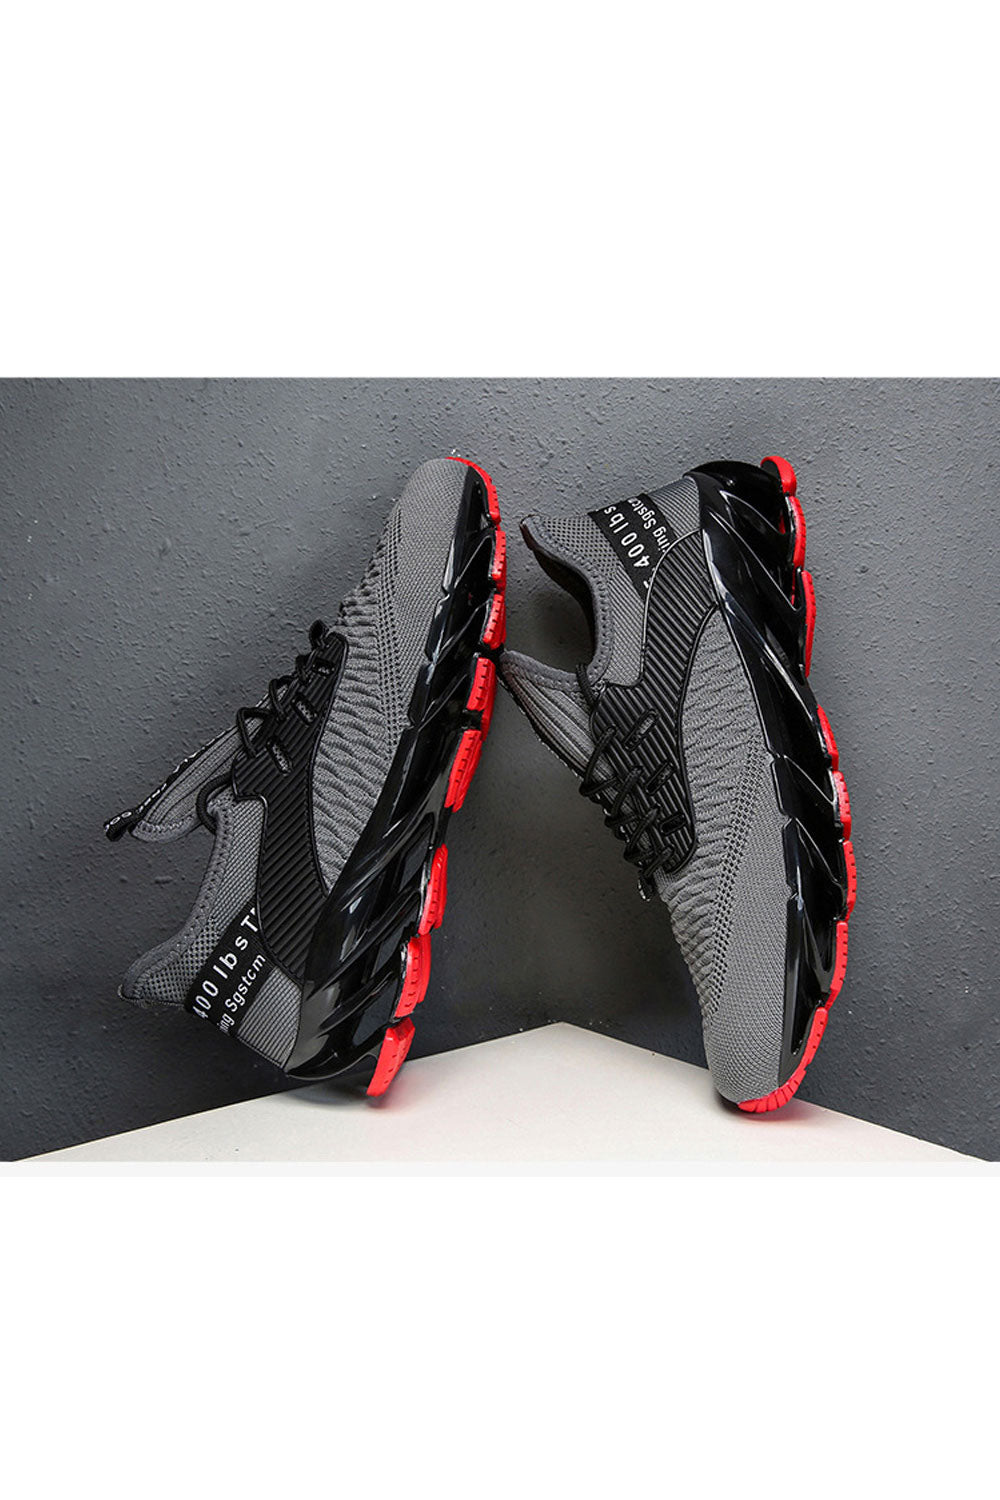 Men's Sophisticated Solid Pattern Stylish Flat Rubber Soled Round Head Lace Up Breathable Sneaker Shoes